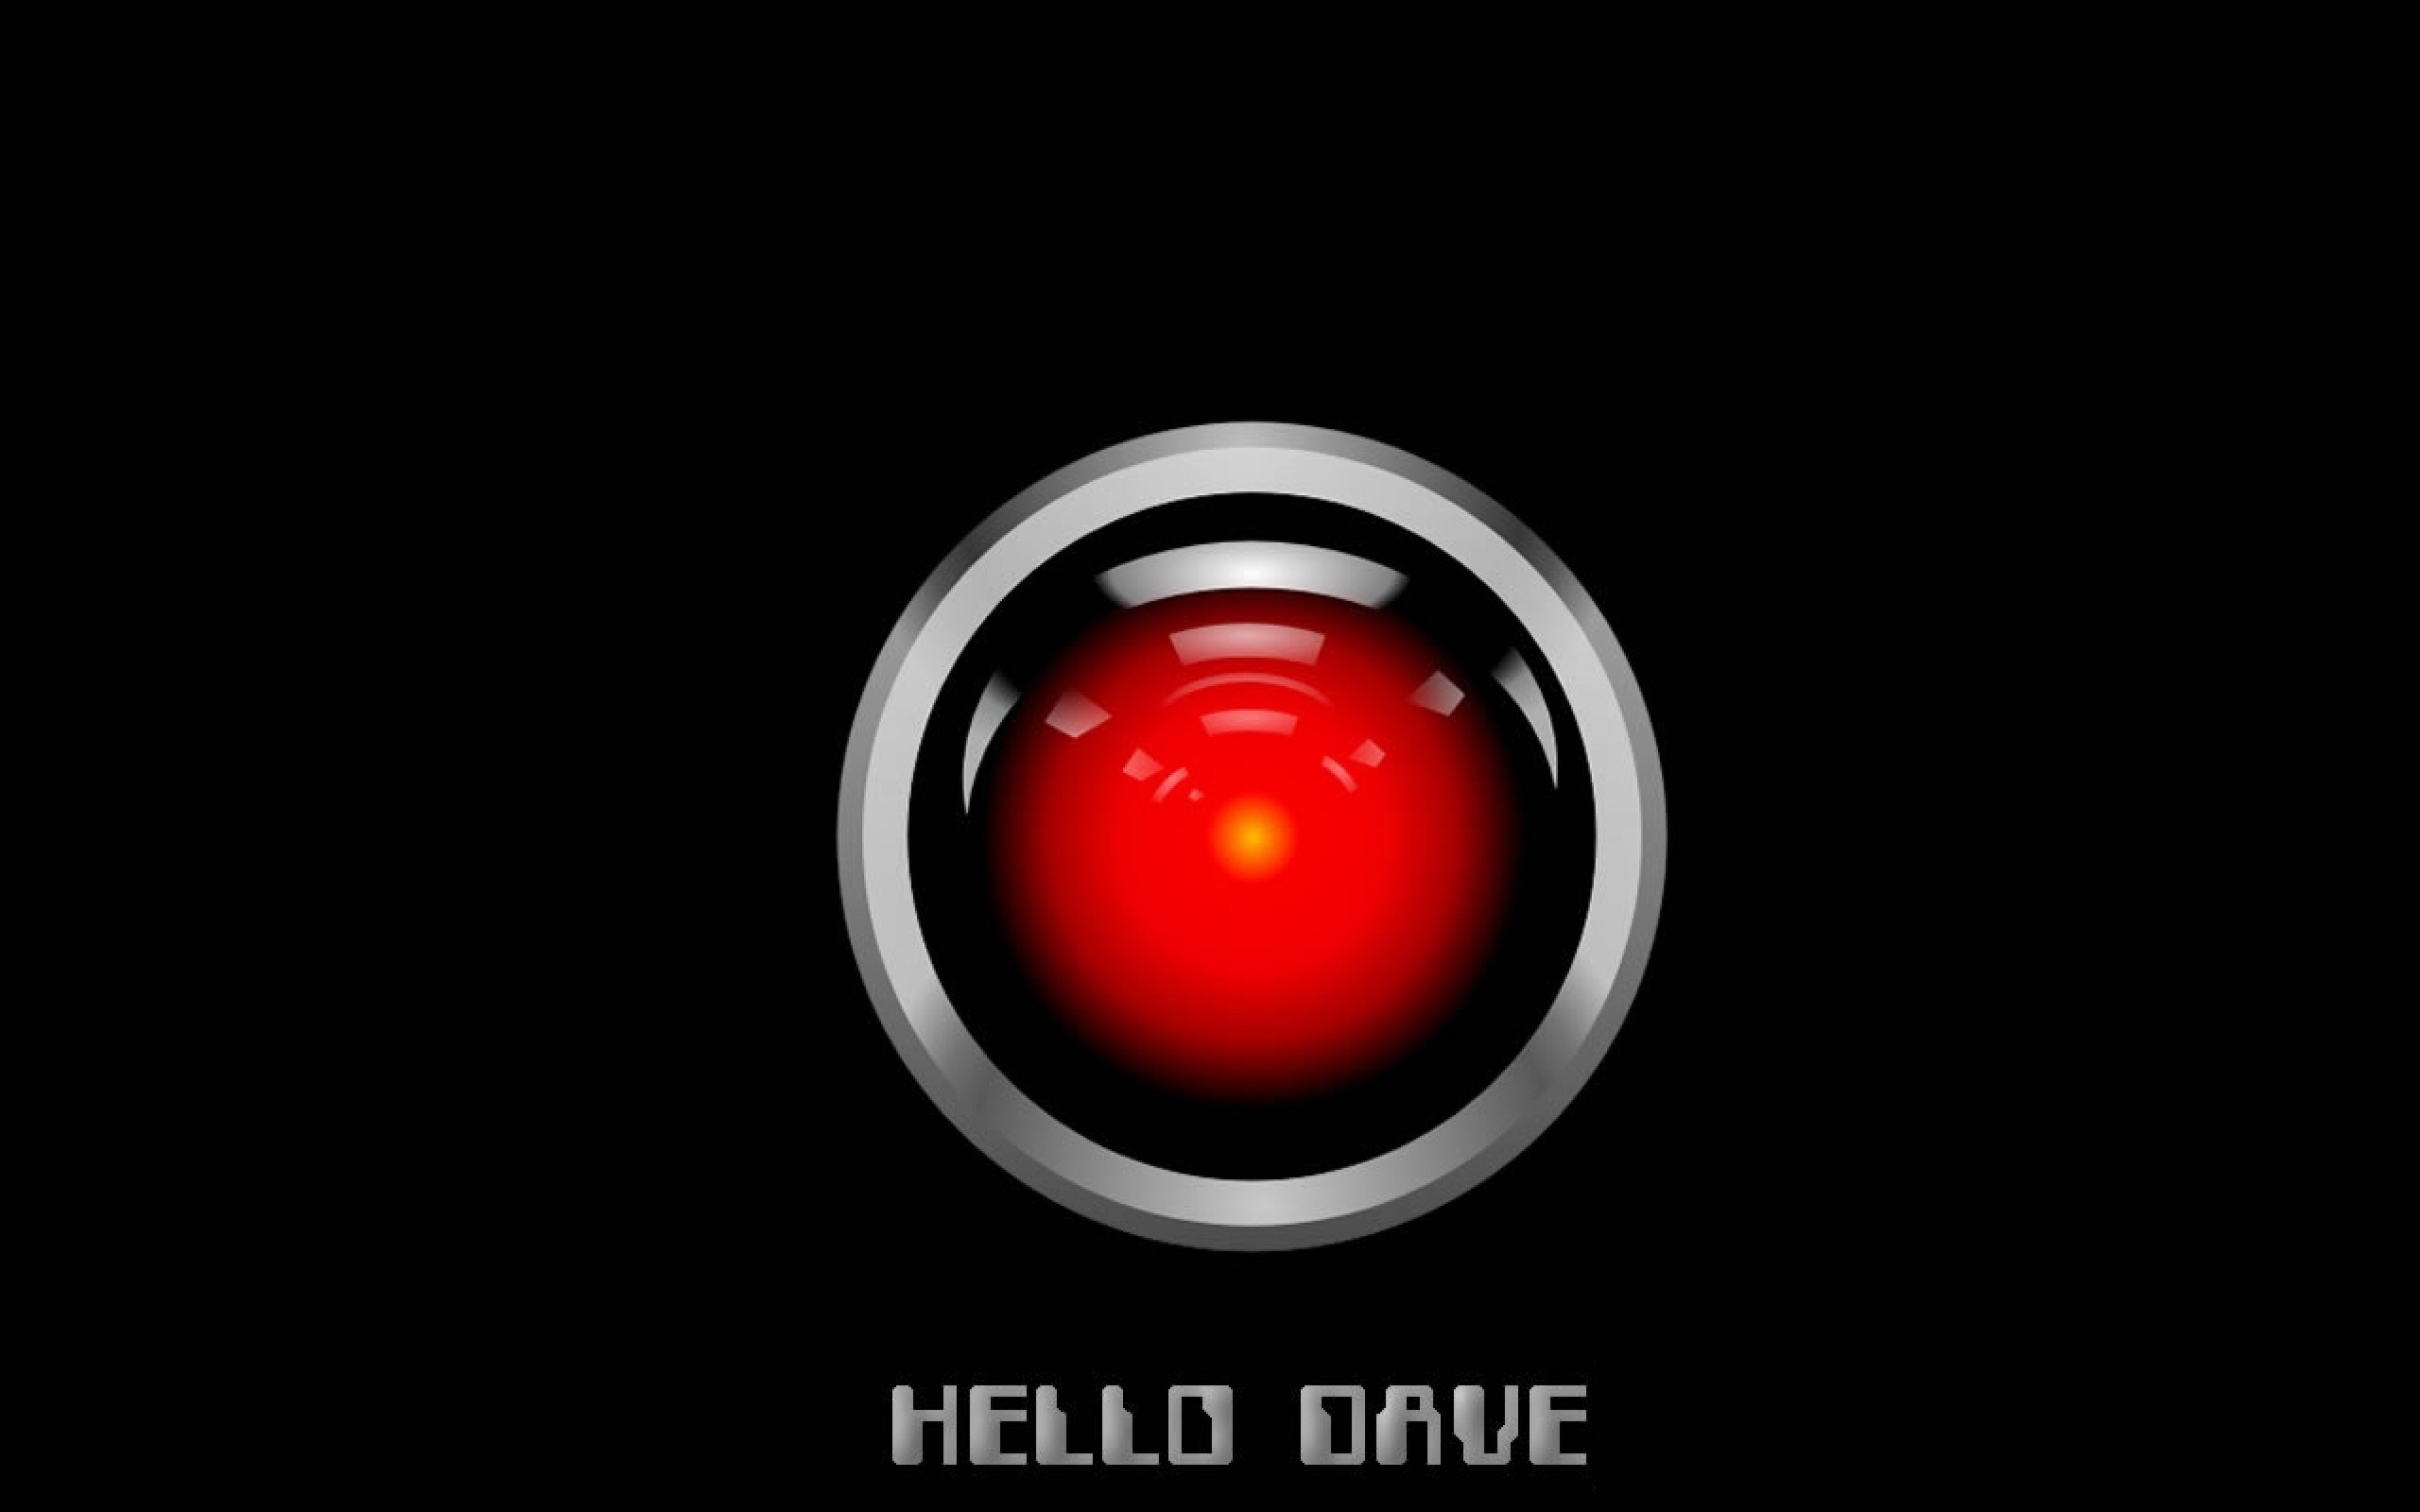 Hal 9000 10x Wallpaper Photos Download Jpg Png Gif Raw Tiff Psd Pdf And Watch Online